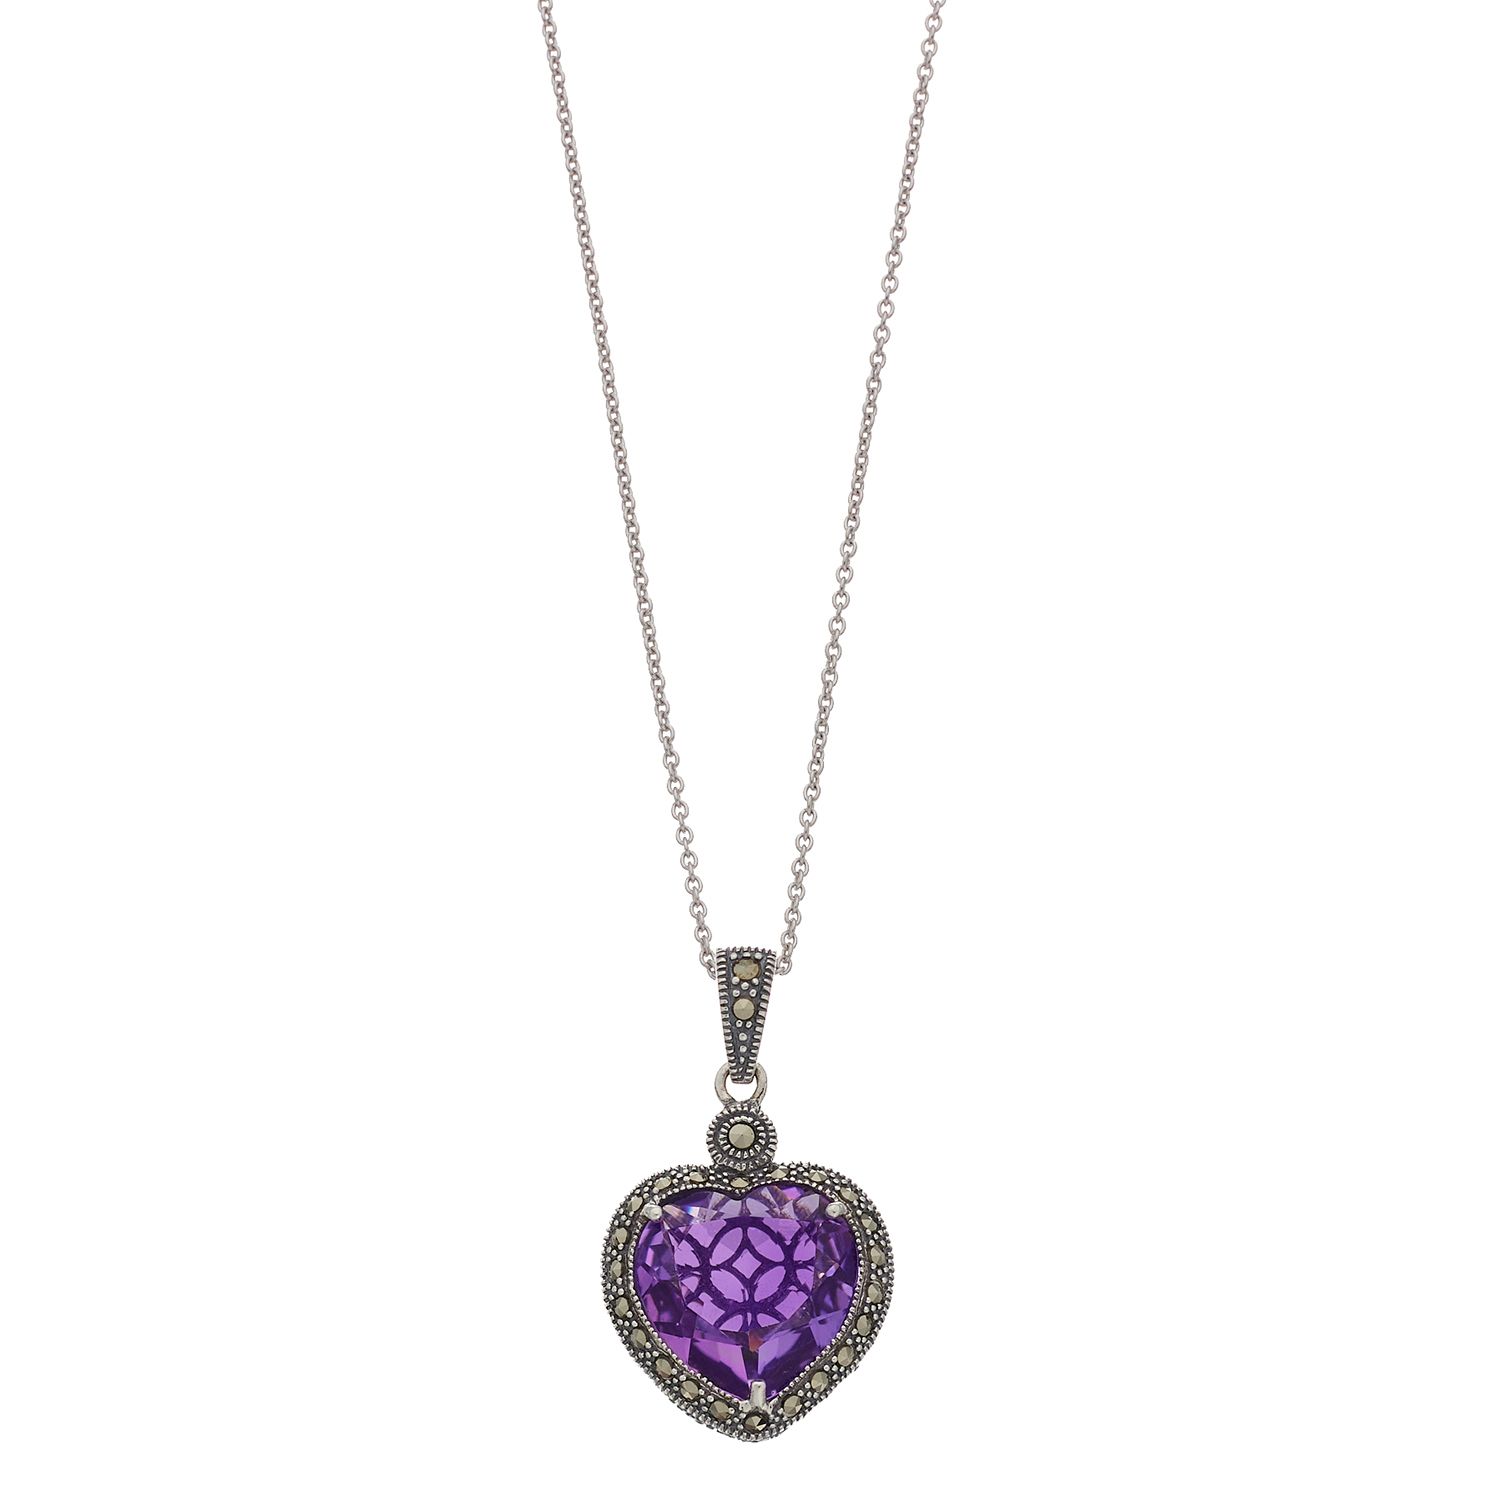 Image for Lavish by TJM Sterling Silver Lab-Created Amethyst & Marcasite Heart Pendant Necklace at Kohl's.